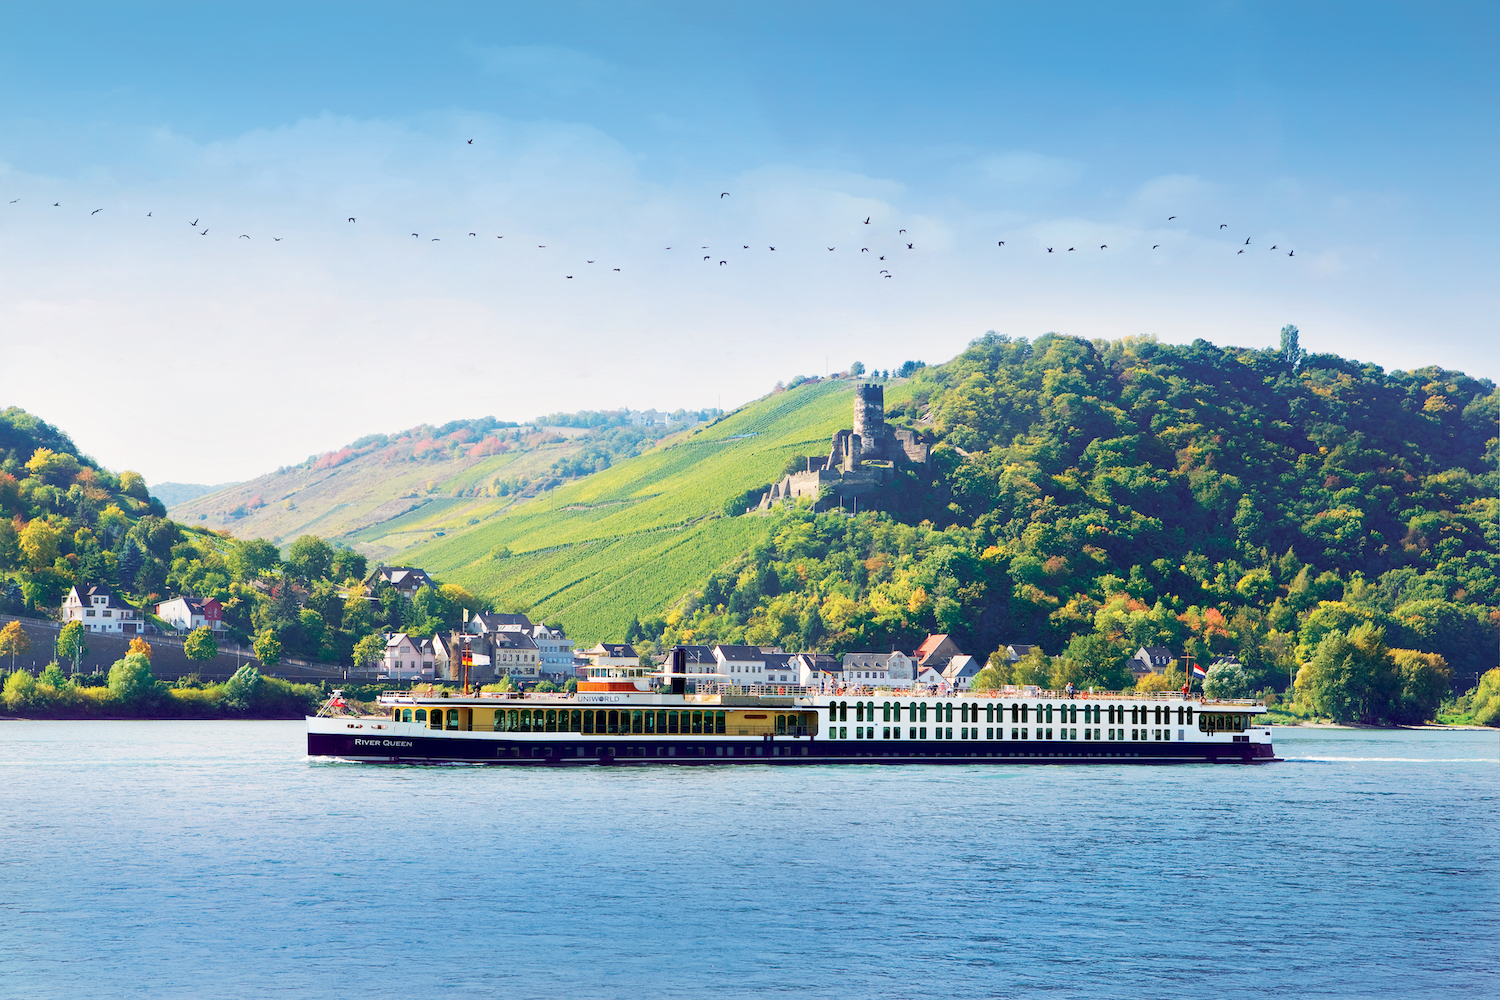 Uniworld River Queen on the Rhine